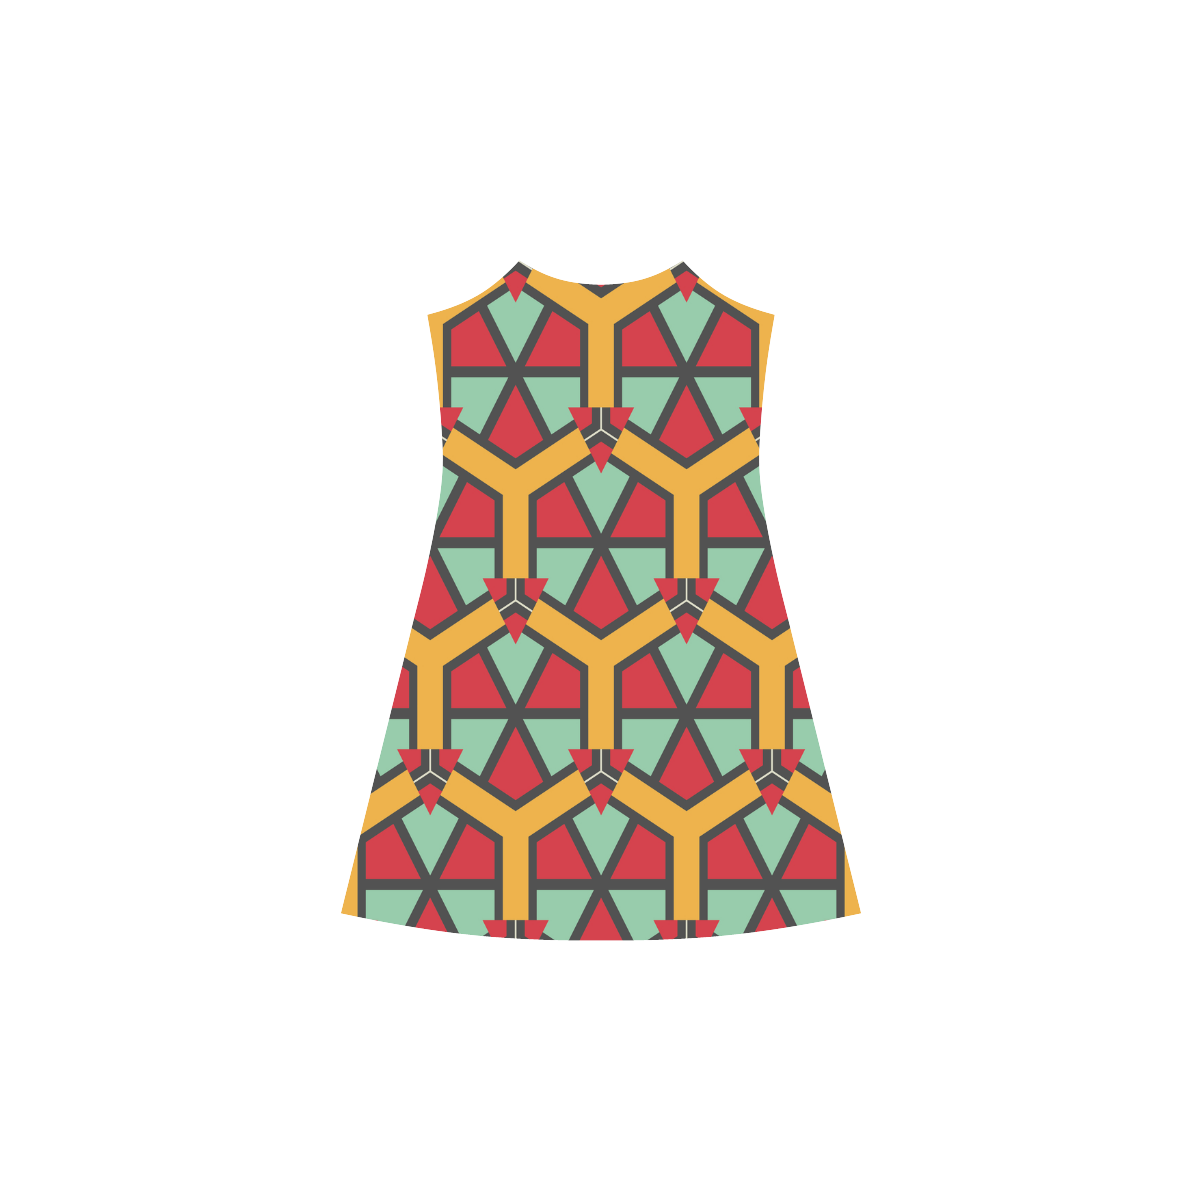 Honeycombs triangles and other shapes pattern Alcestis Slip Dress (Model D05)